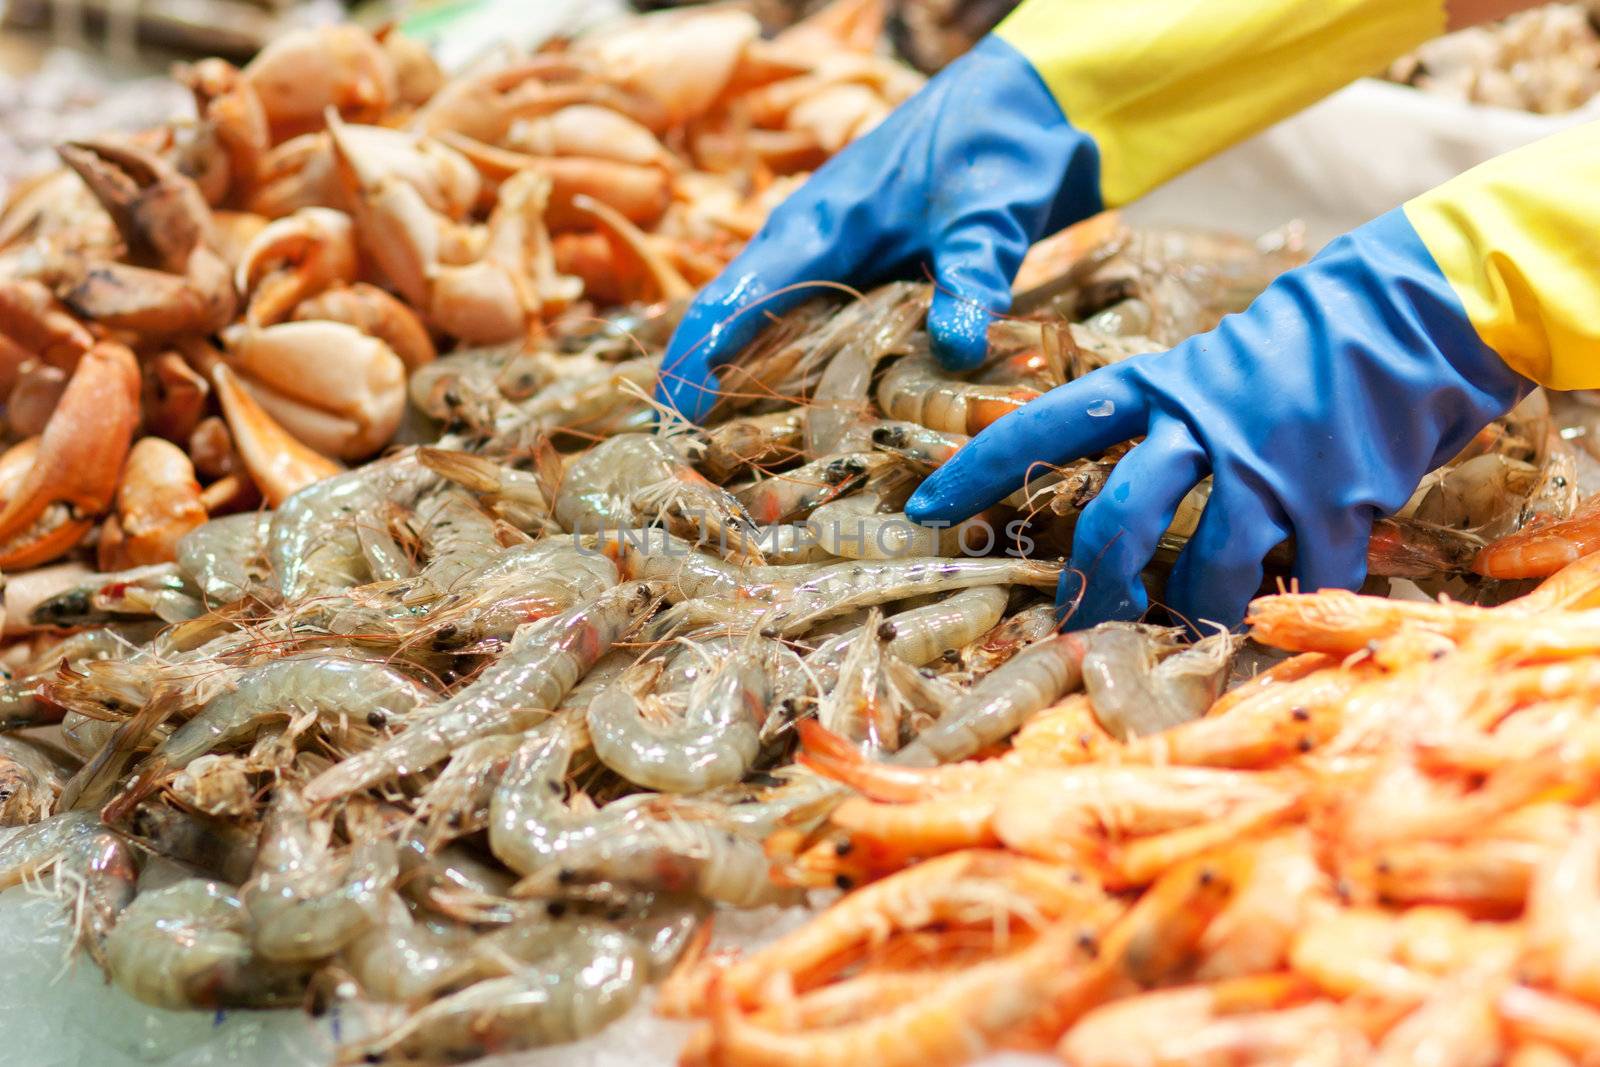 Raw and cooked shrimps in a fish market